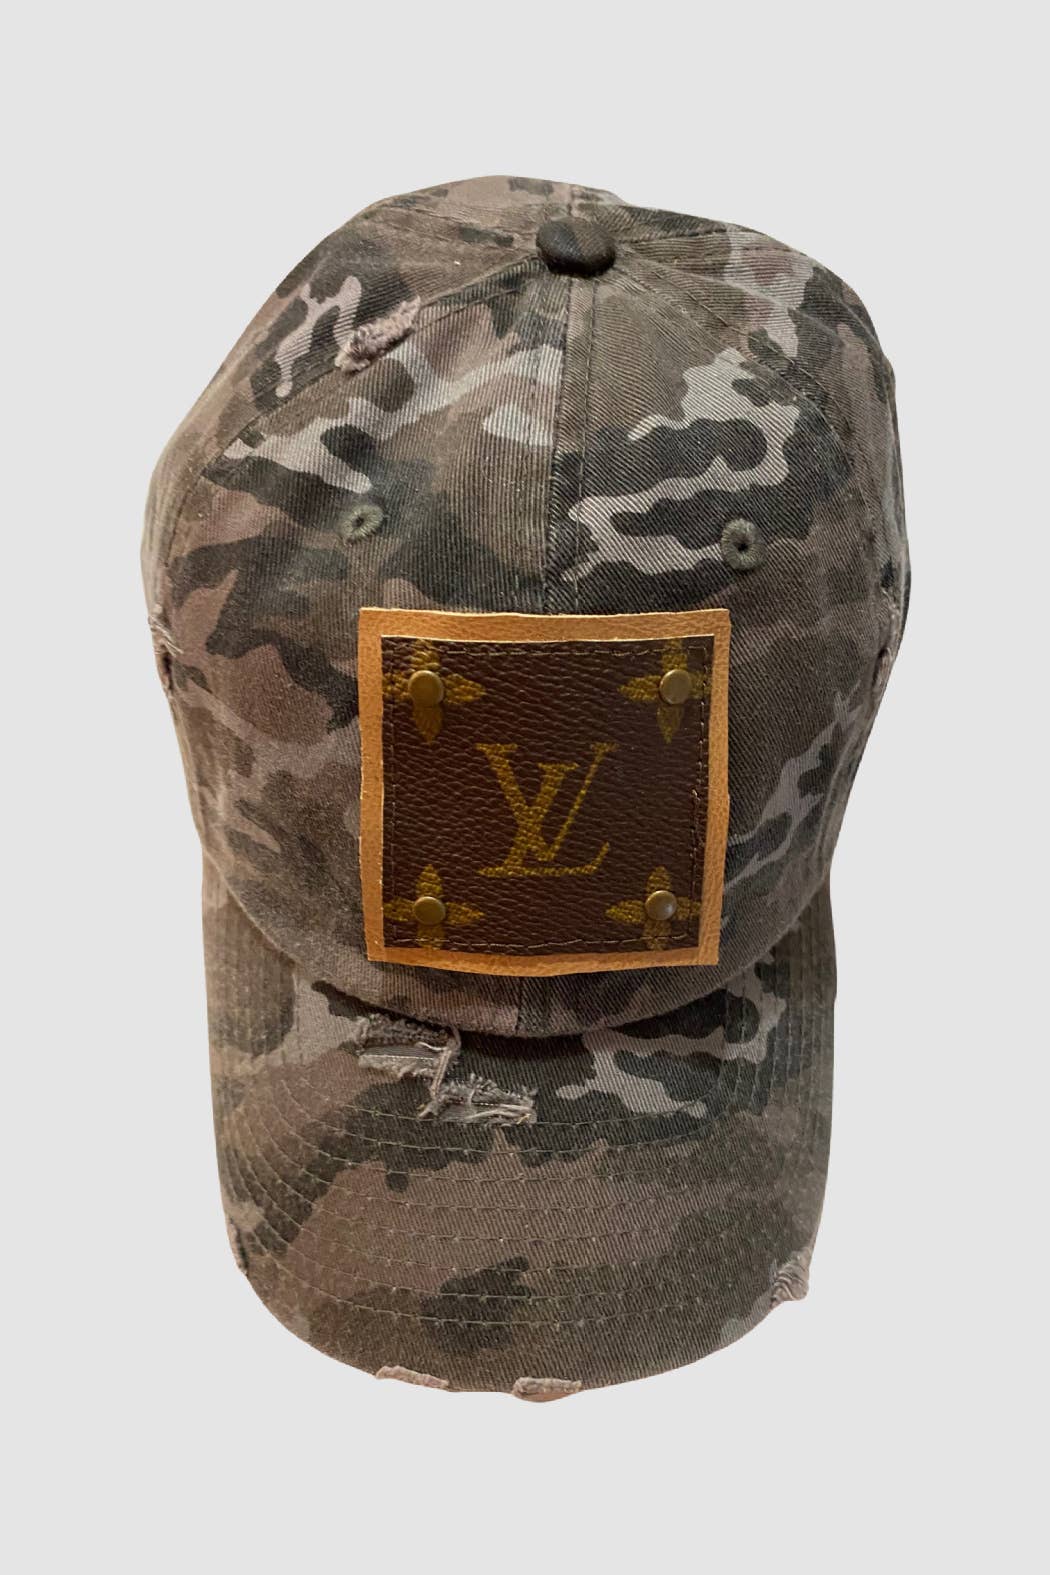 Up-Cycled Black Camo Cap w Authentic Louis Vuitton Materials